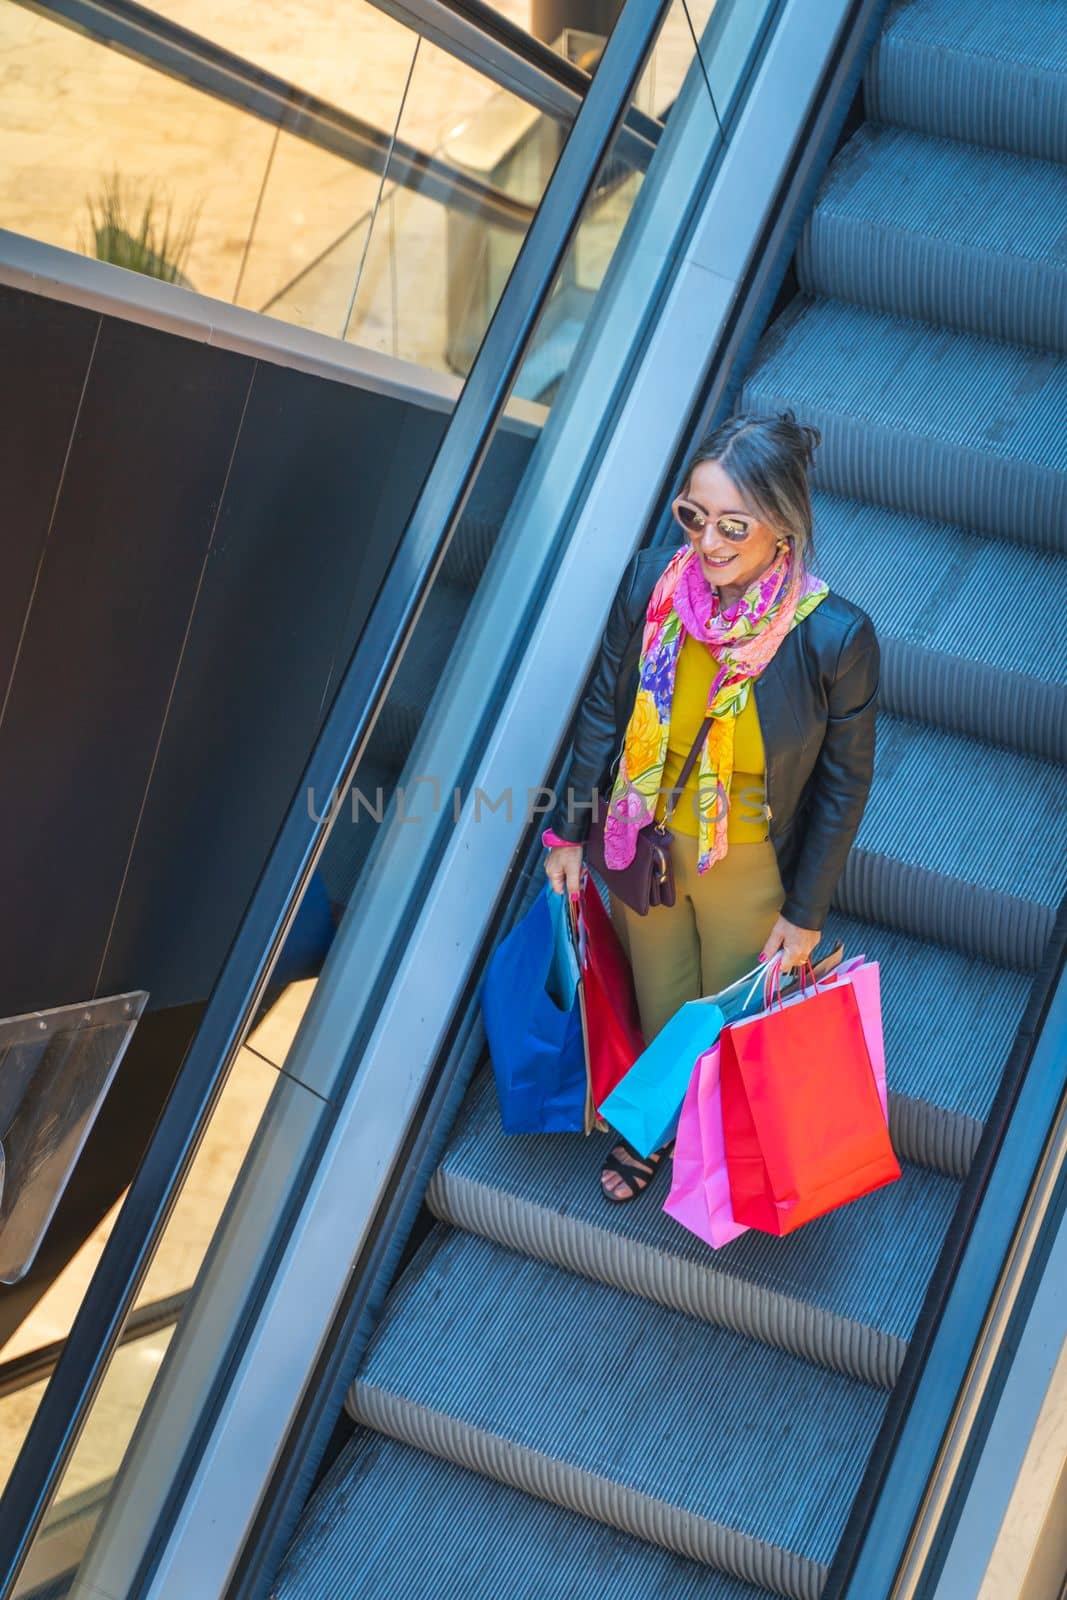 Senior lady with shopping bags on mechanic stairs at mall. Woman riding escalator. High quality 4k footage